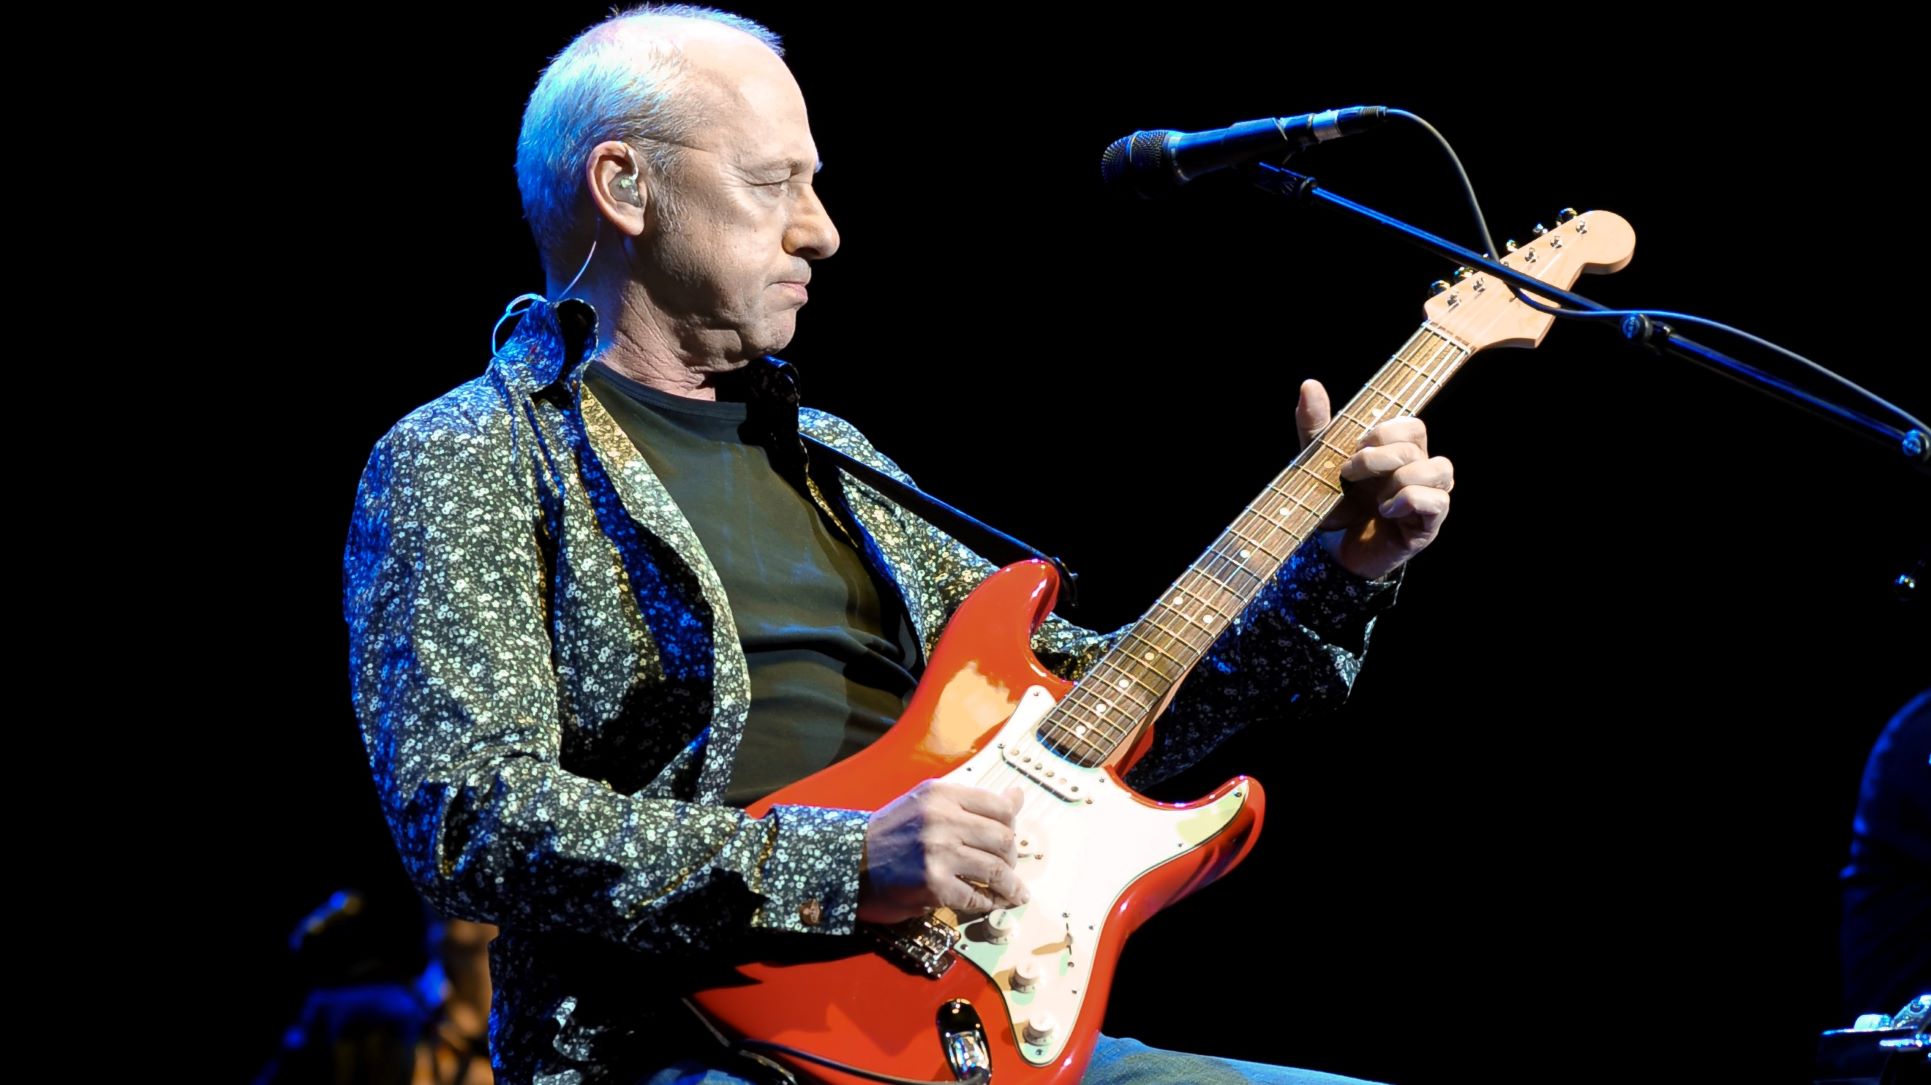 Ever Wondered What Mark Knopfler's Contemporaries Have to Say